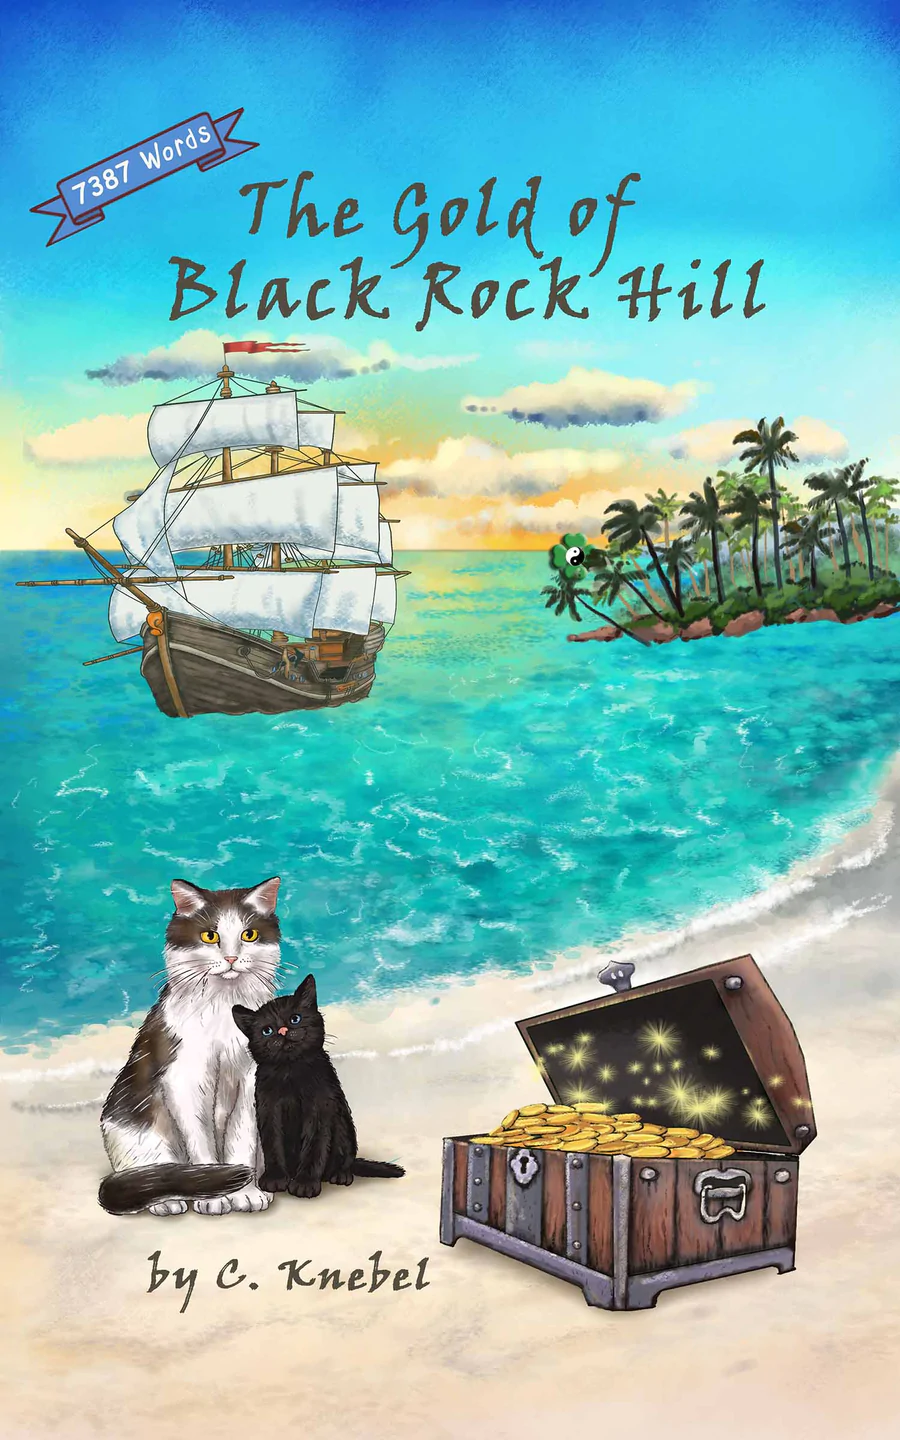 2 Cats sitting on a beach beside a chest full of gold, ship sailing on the background with a little island